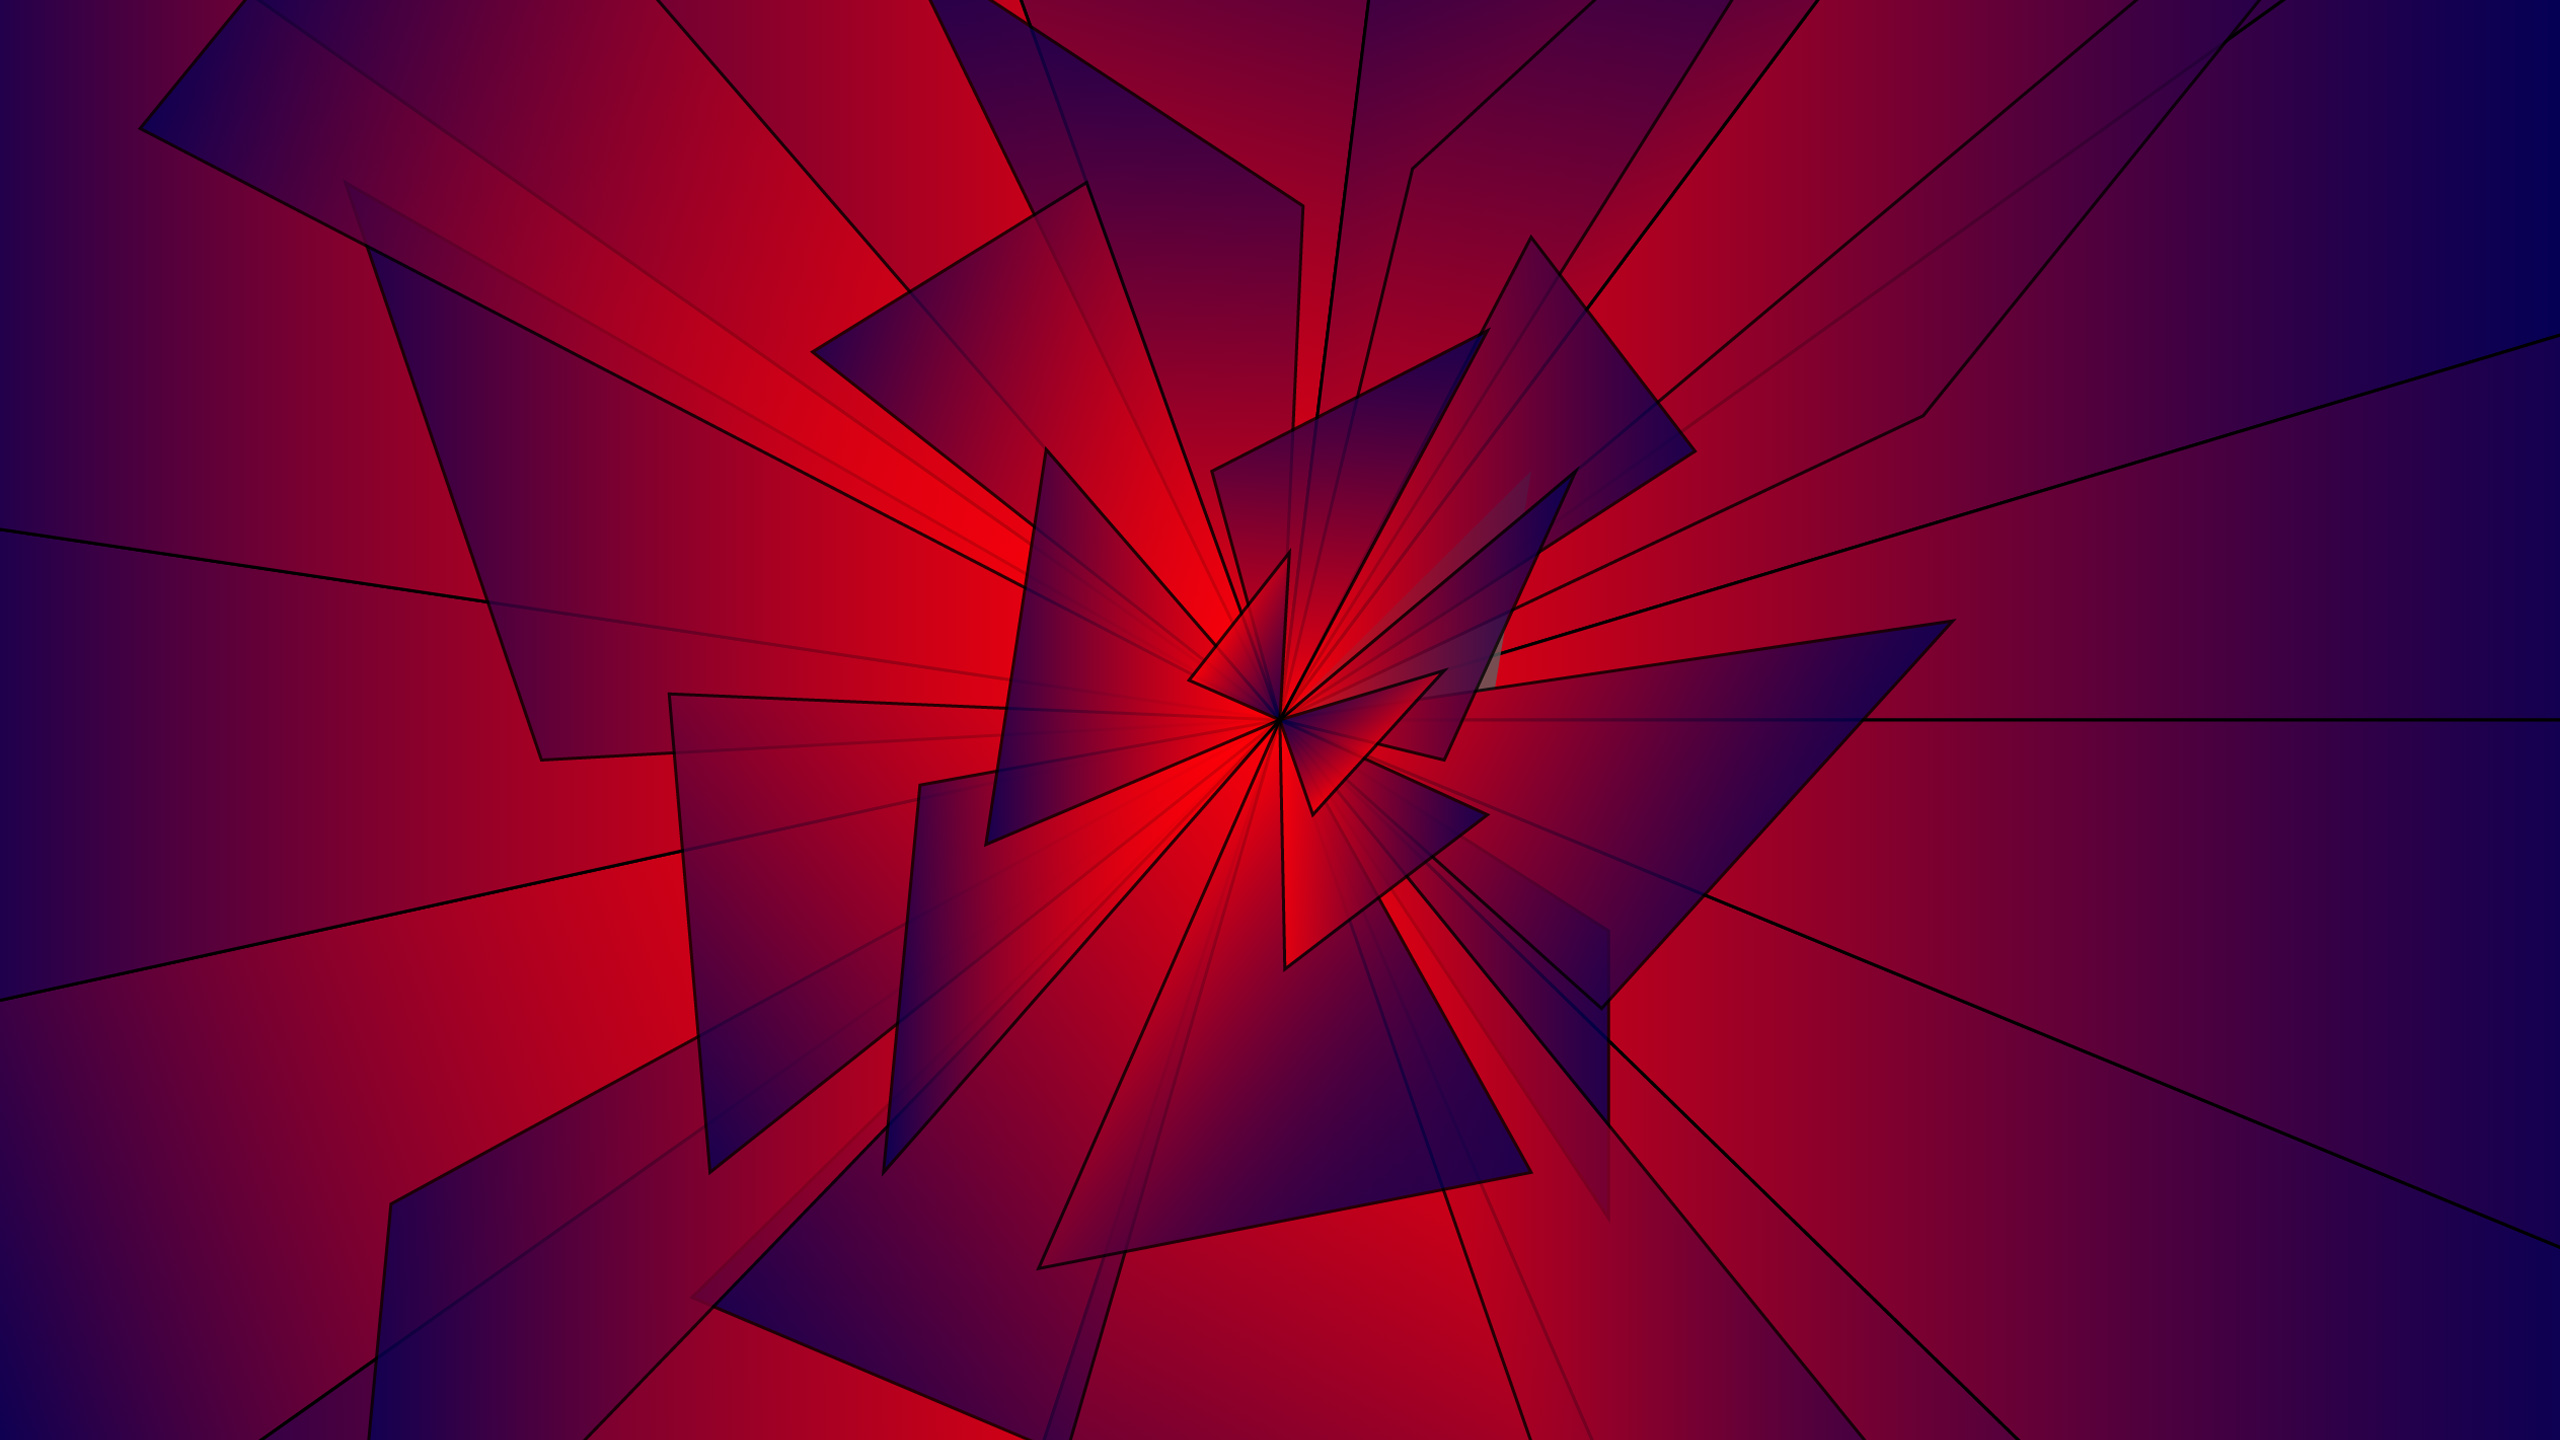 Red Blue Digital Art Geometry Shapes Pattern HD Abstract